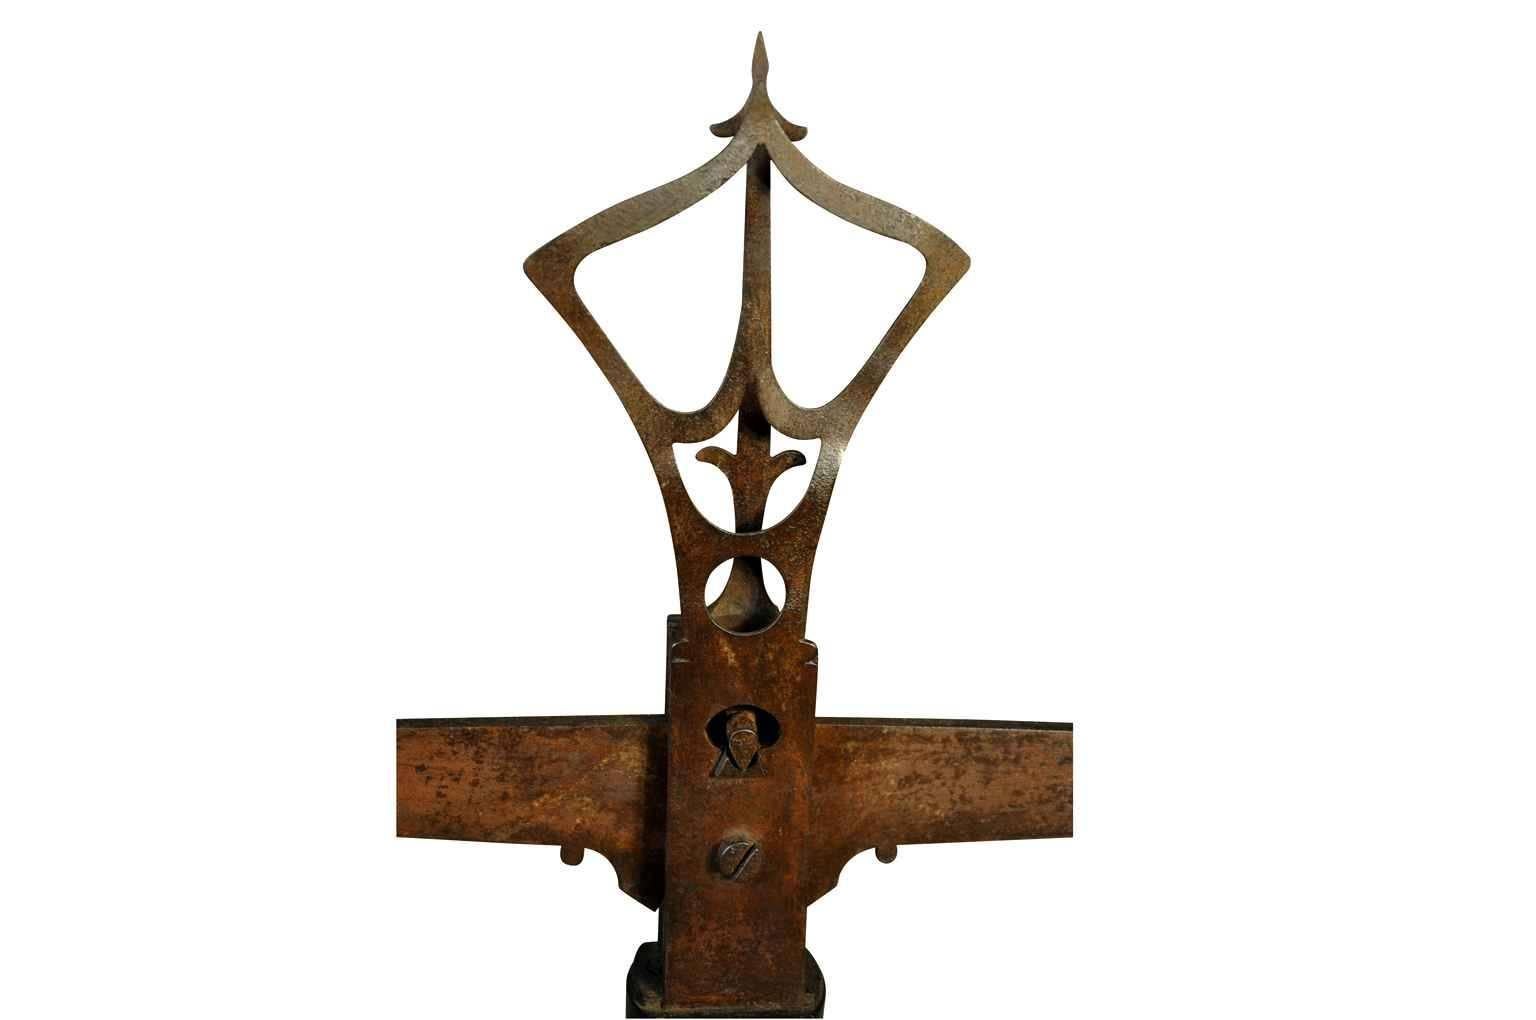 A charming 19th century Balance - Scale from France.  Wonderfully constructed with a turned center column in ebonized wood.  The balance mechanism is in cast iron with 